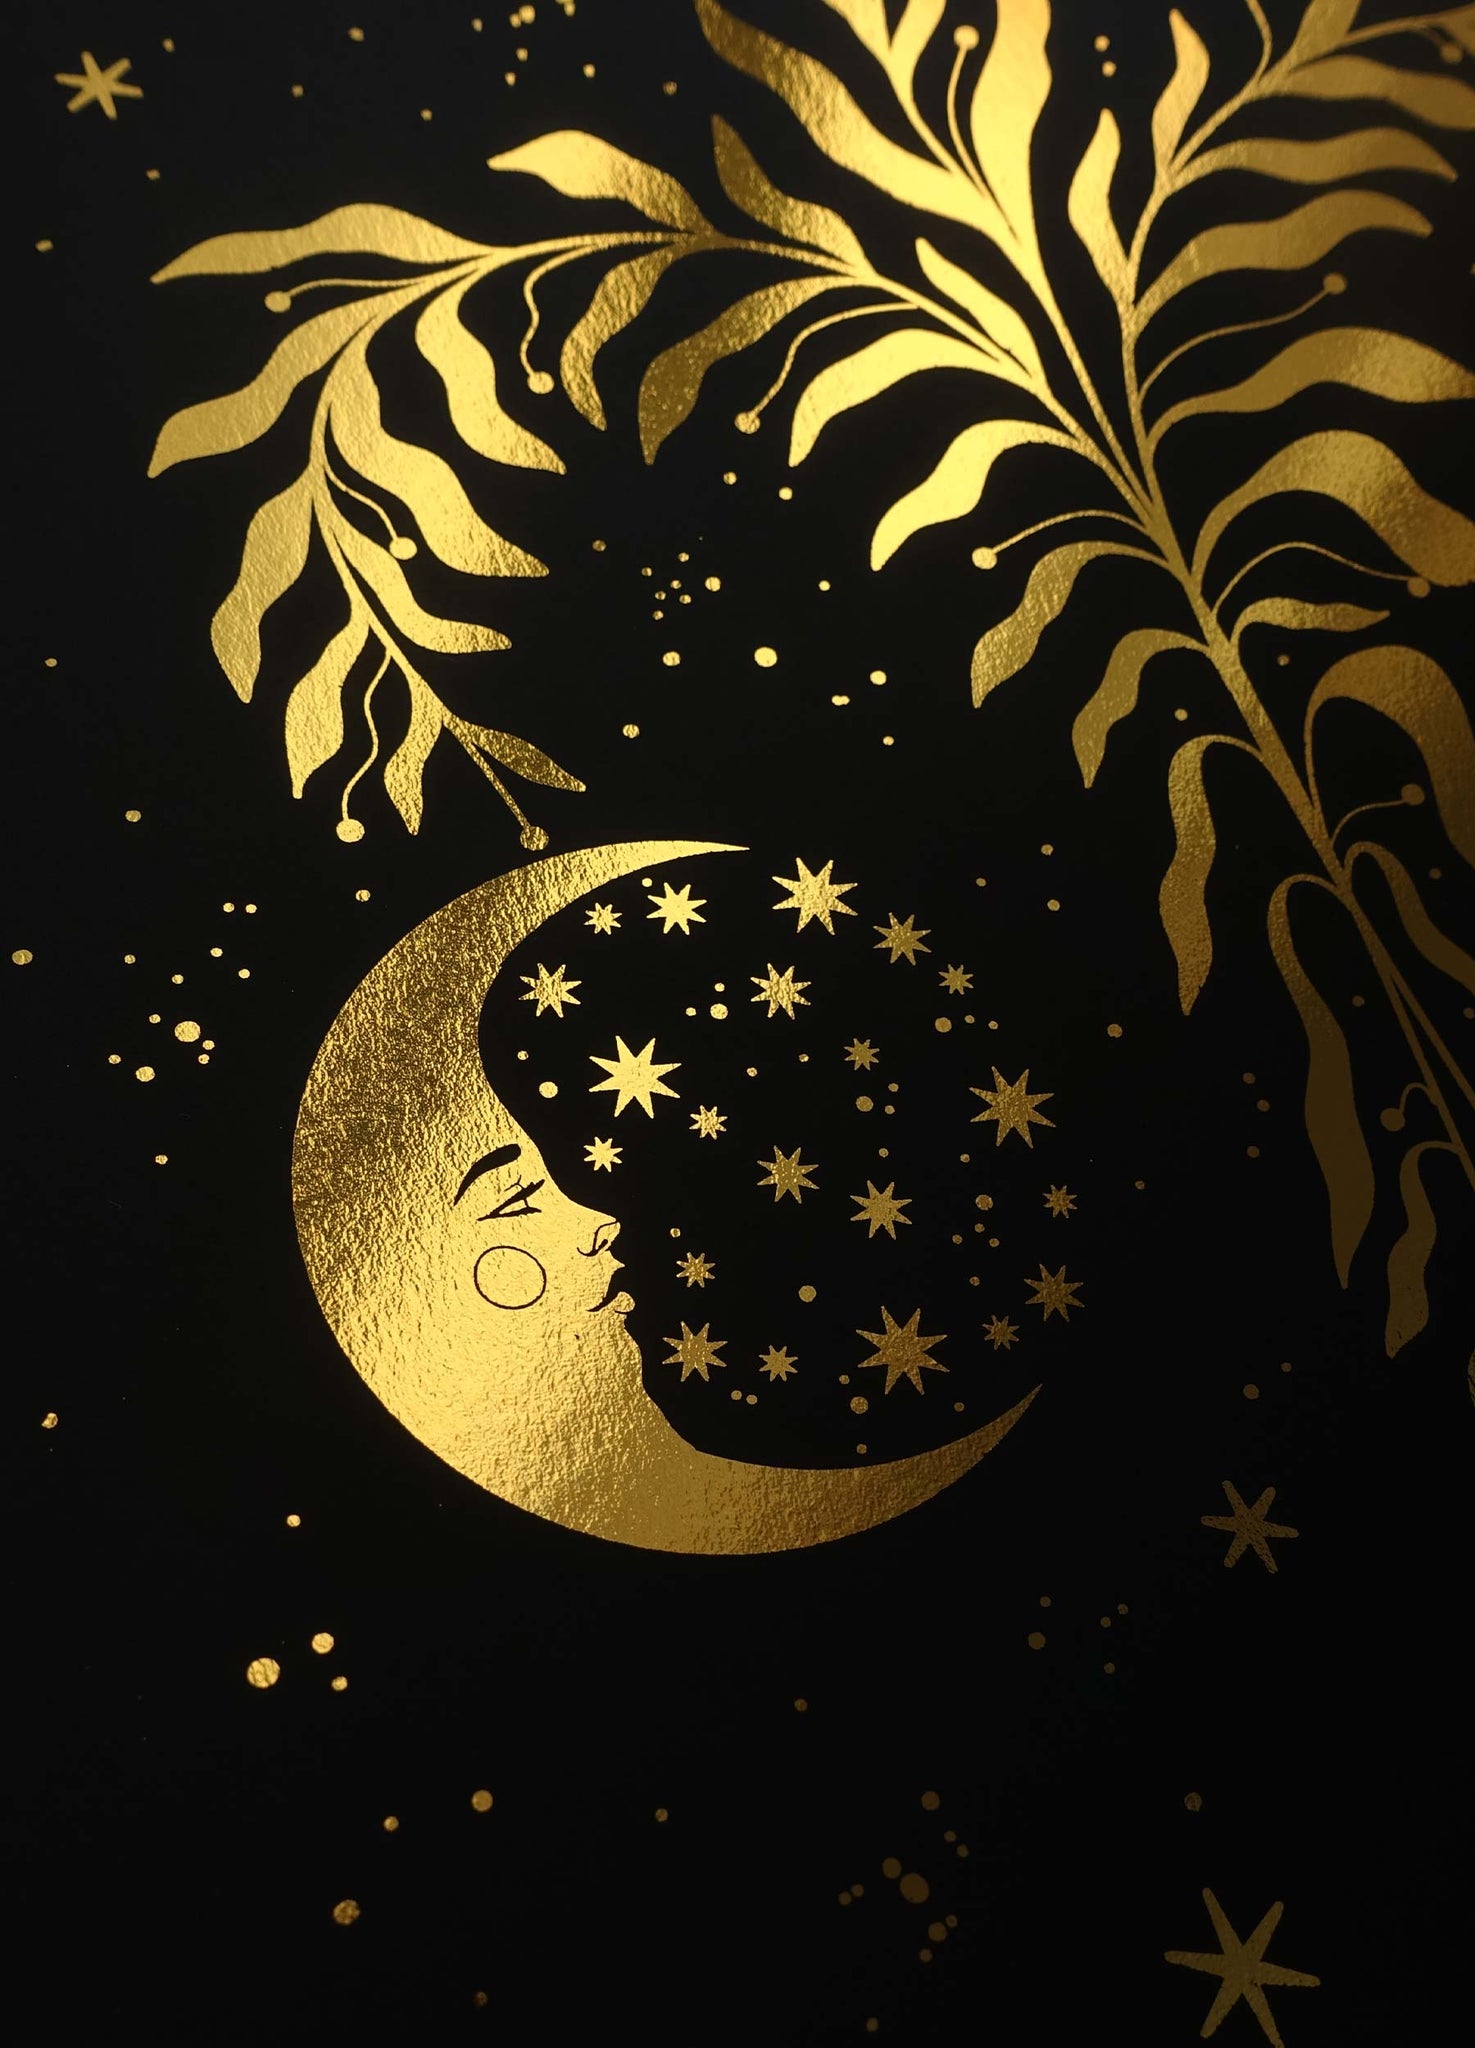 The Yule tree with a sun, moon and star gold foil art print on black paper by Cocorrina & Co